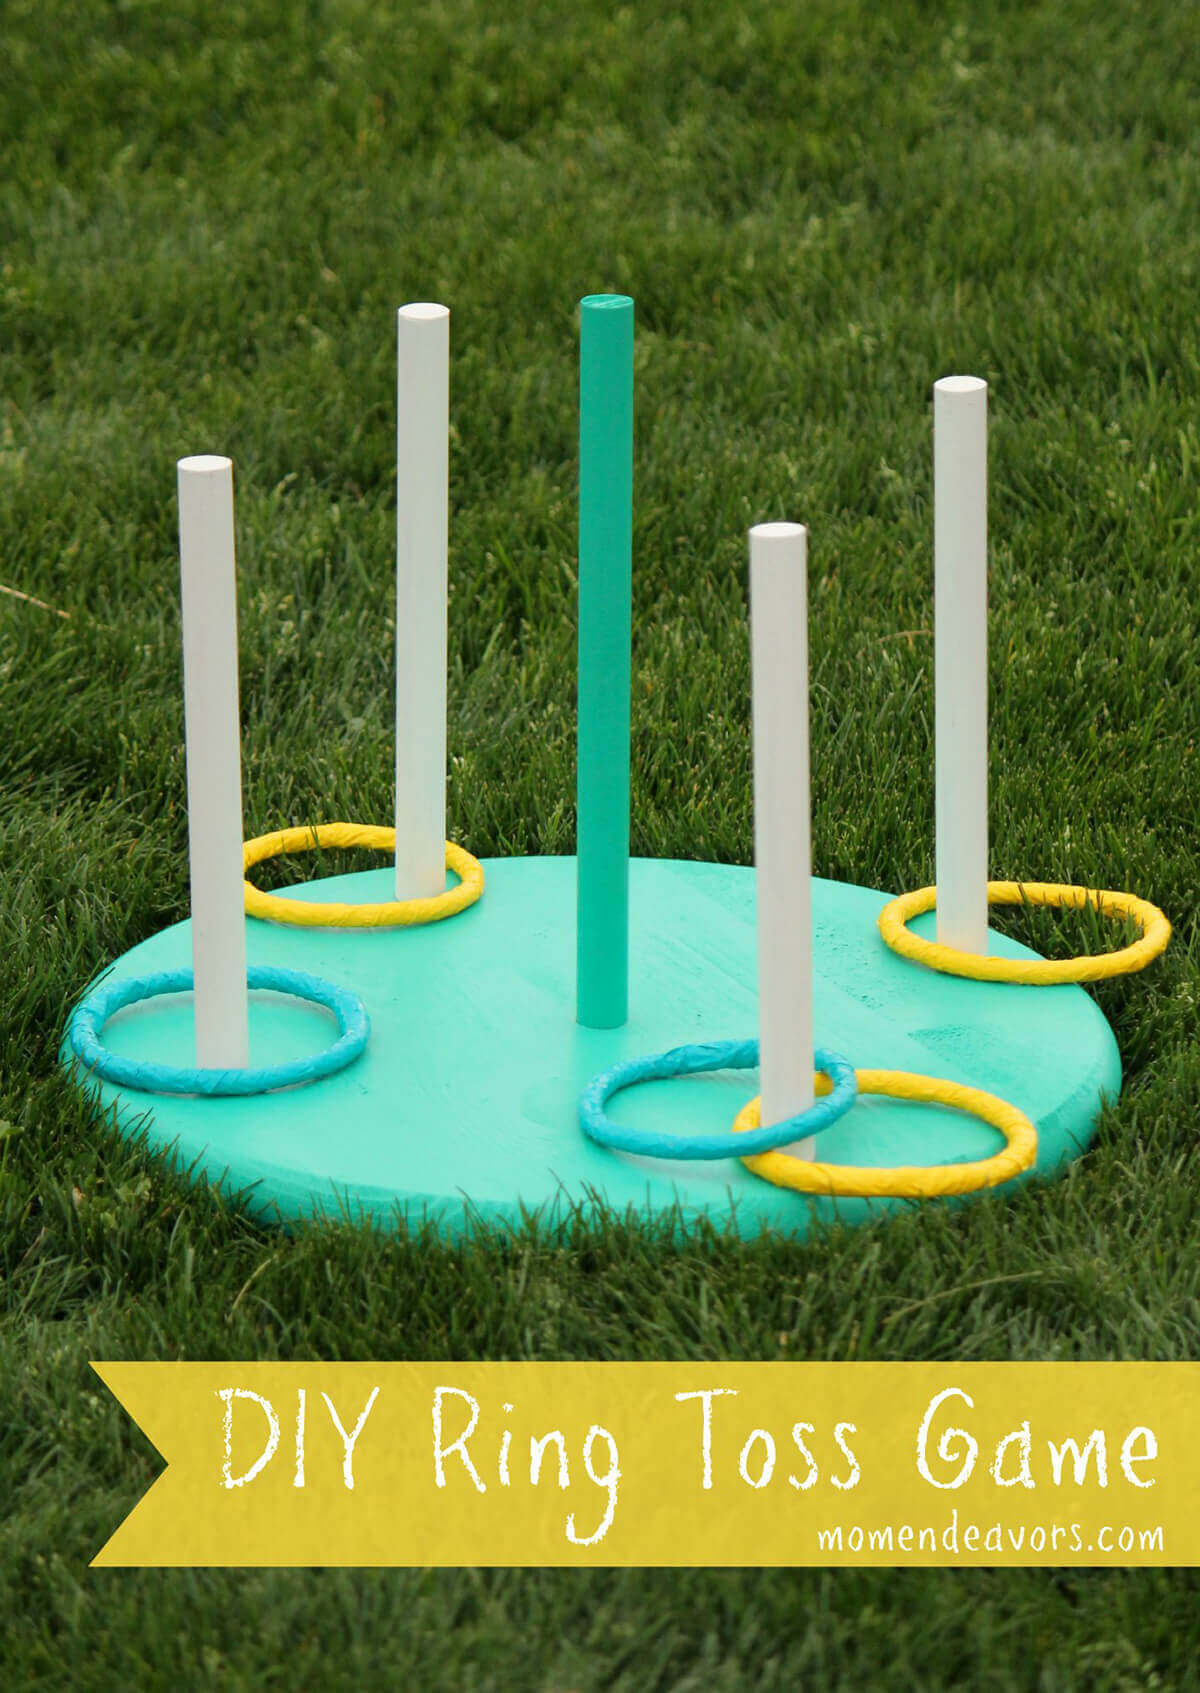 A Green and Yellow Ring Toss Game